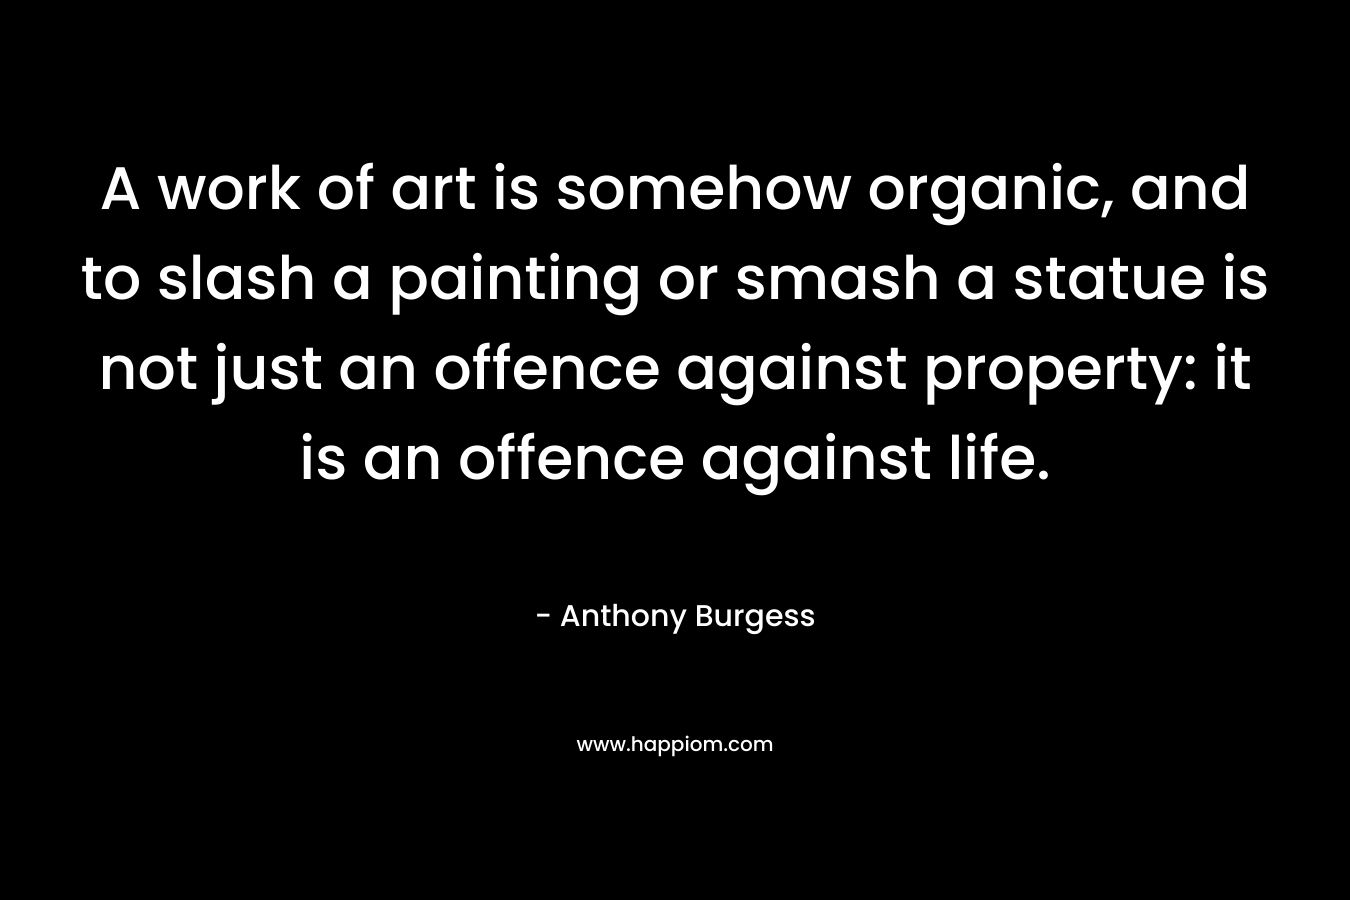 A work of art is somehow organic, and to slash a painting or smash a statue is not just an offence against property: it is an offence against life.